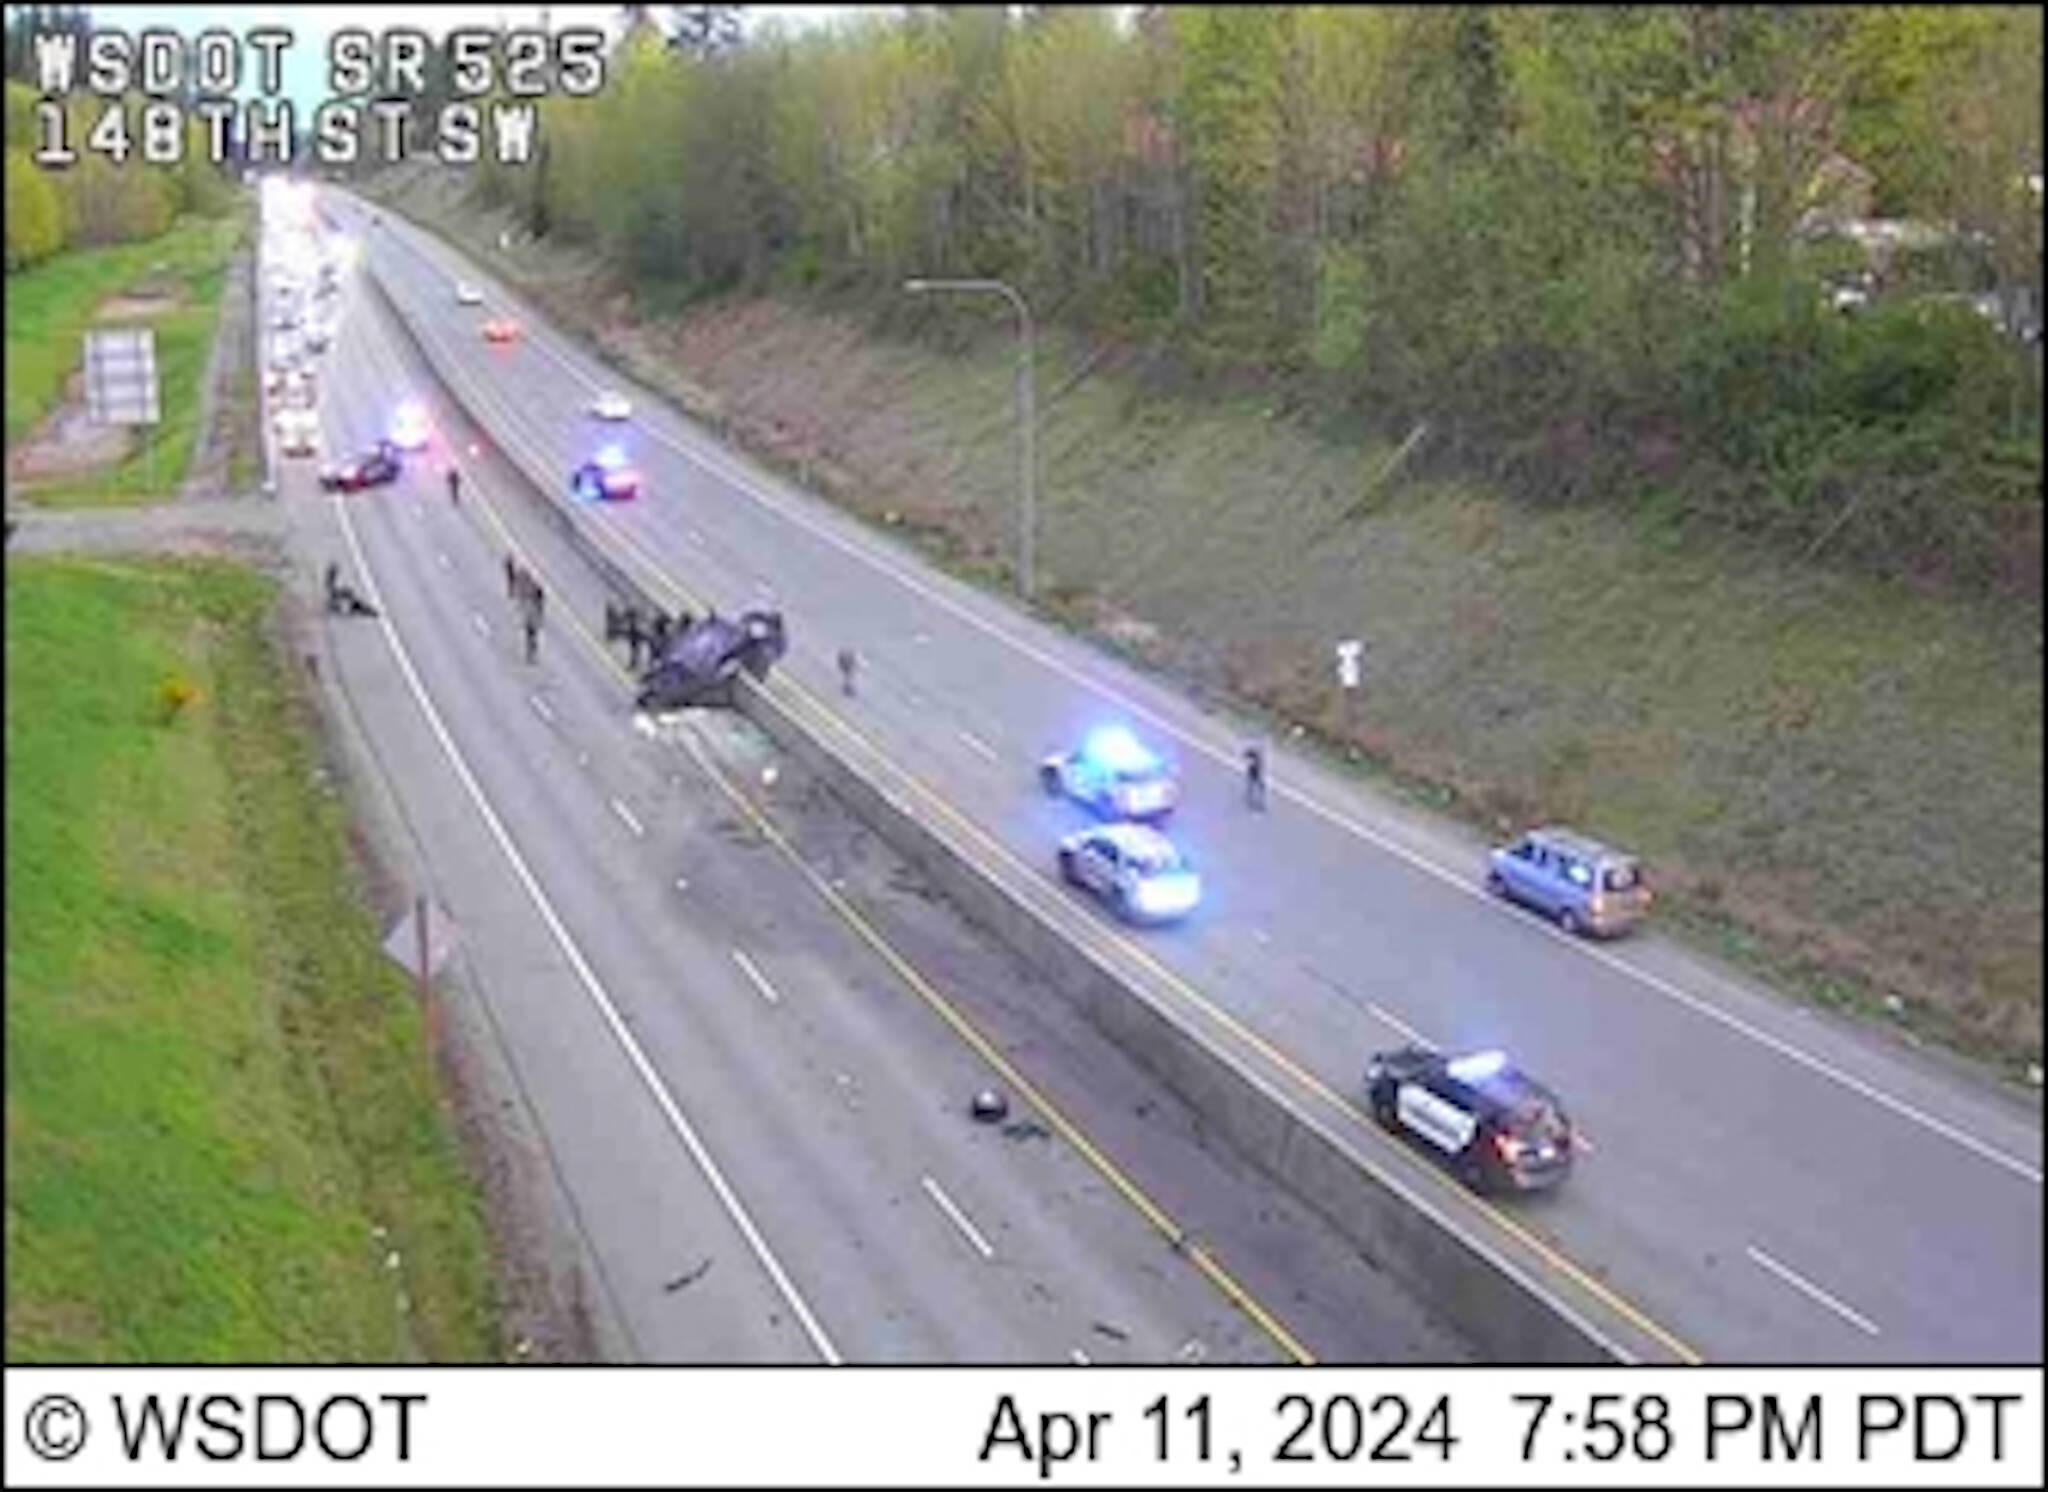 Police respond to a wrong way crash April 11 on Highway 525 in Lynnwood after a police chase. (Photo provided by Washington State Department of Transportation)